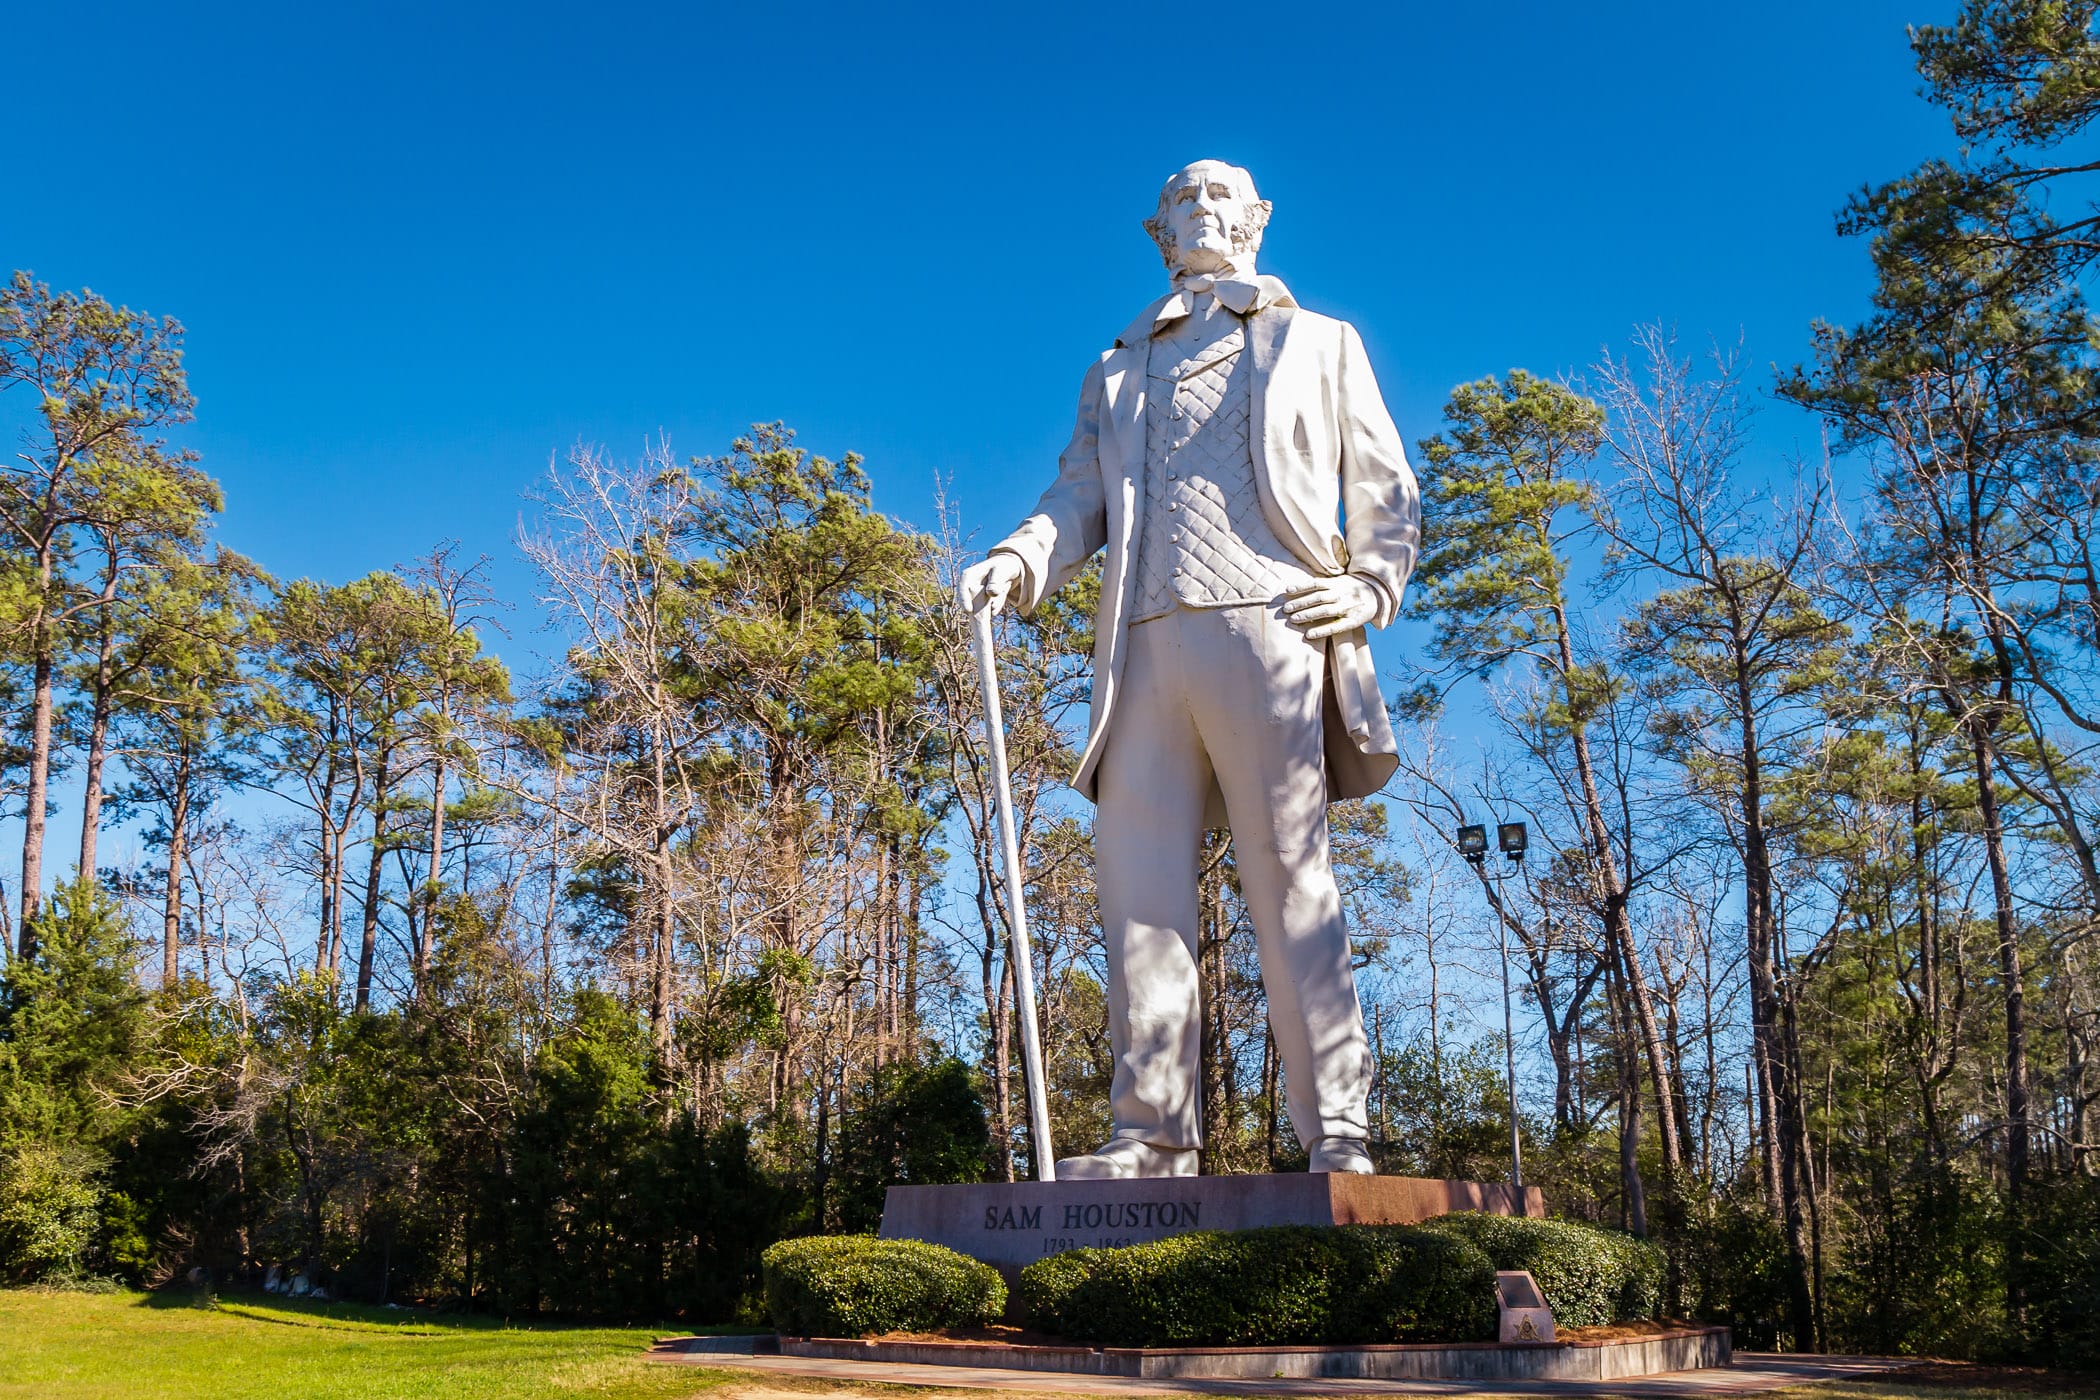 This 67-foot-tall statue of the first (and third) President of the Republic of Texas, Sam Houston, rises into the sky in Huntsville.